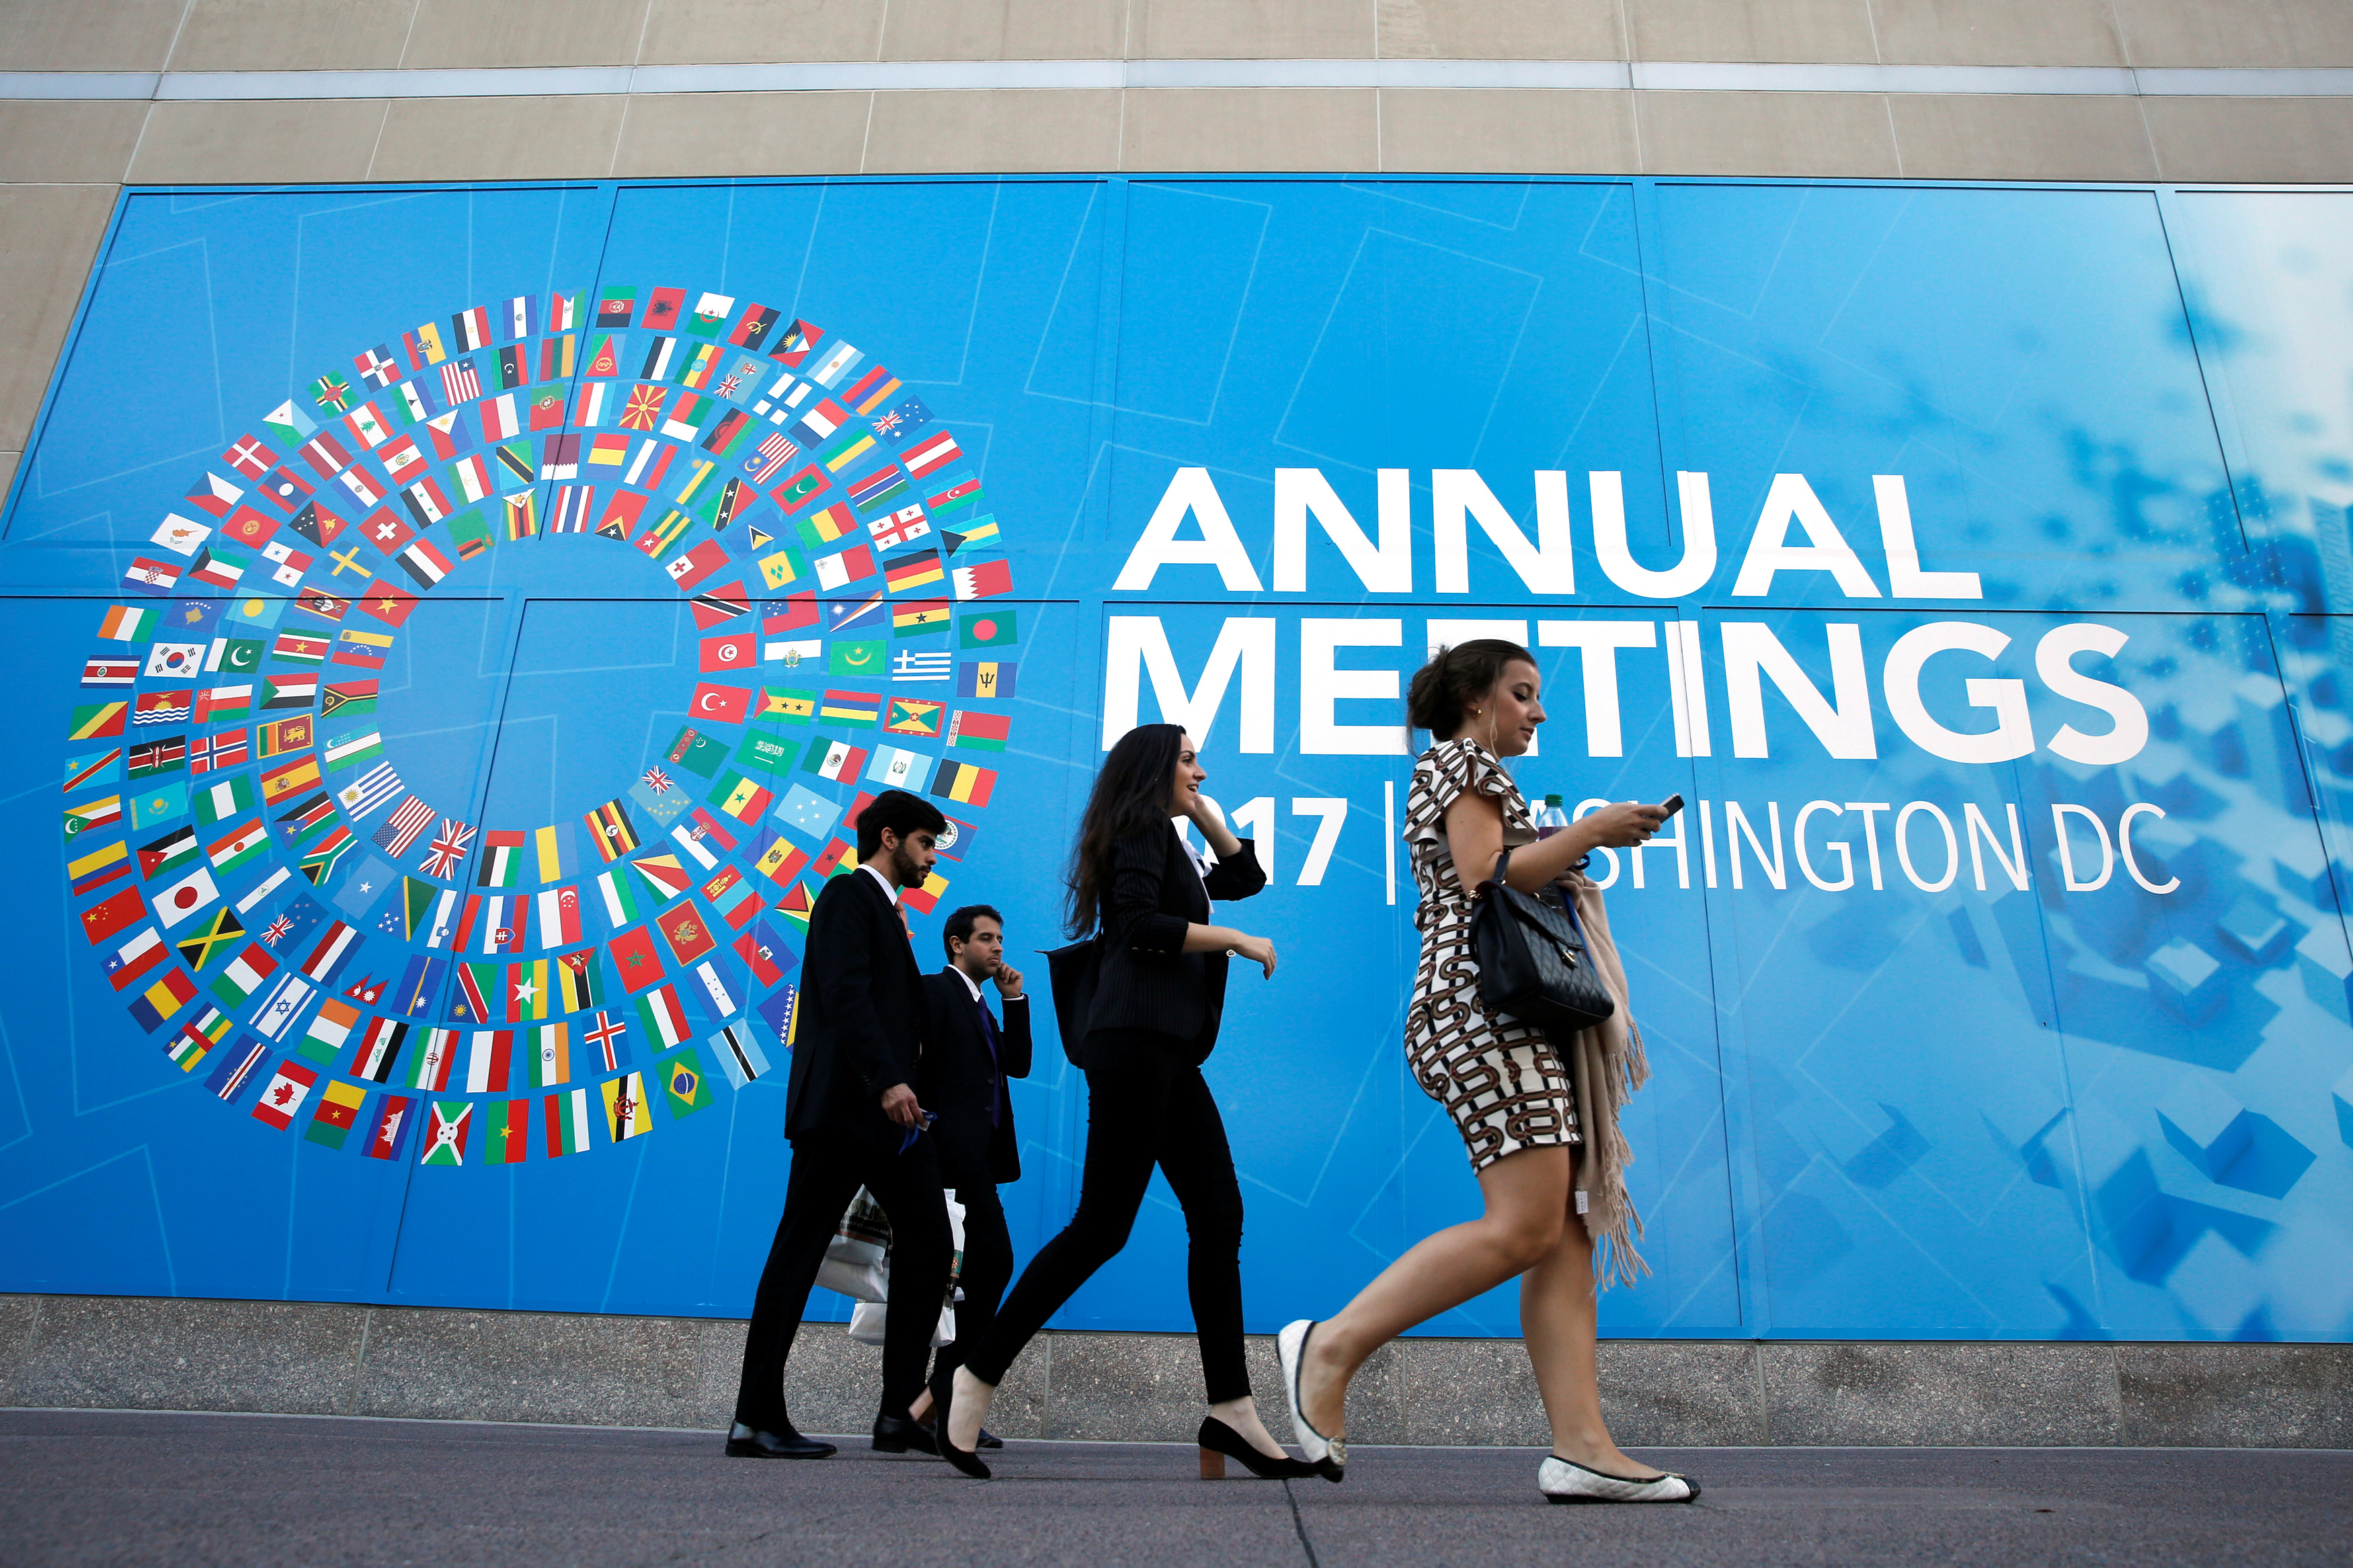 Future Development Reads The IMF and World Bank annual meetings